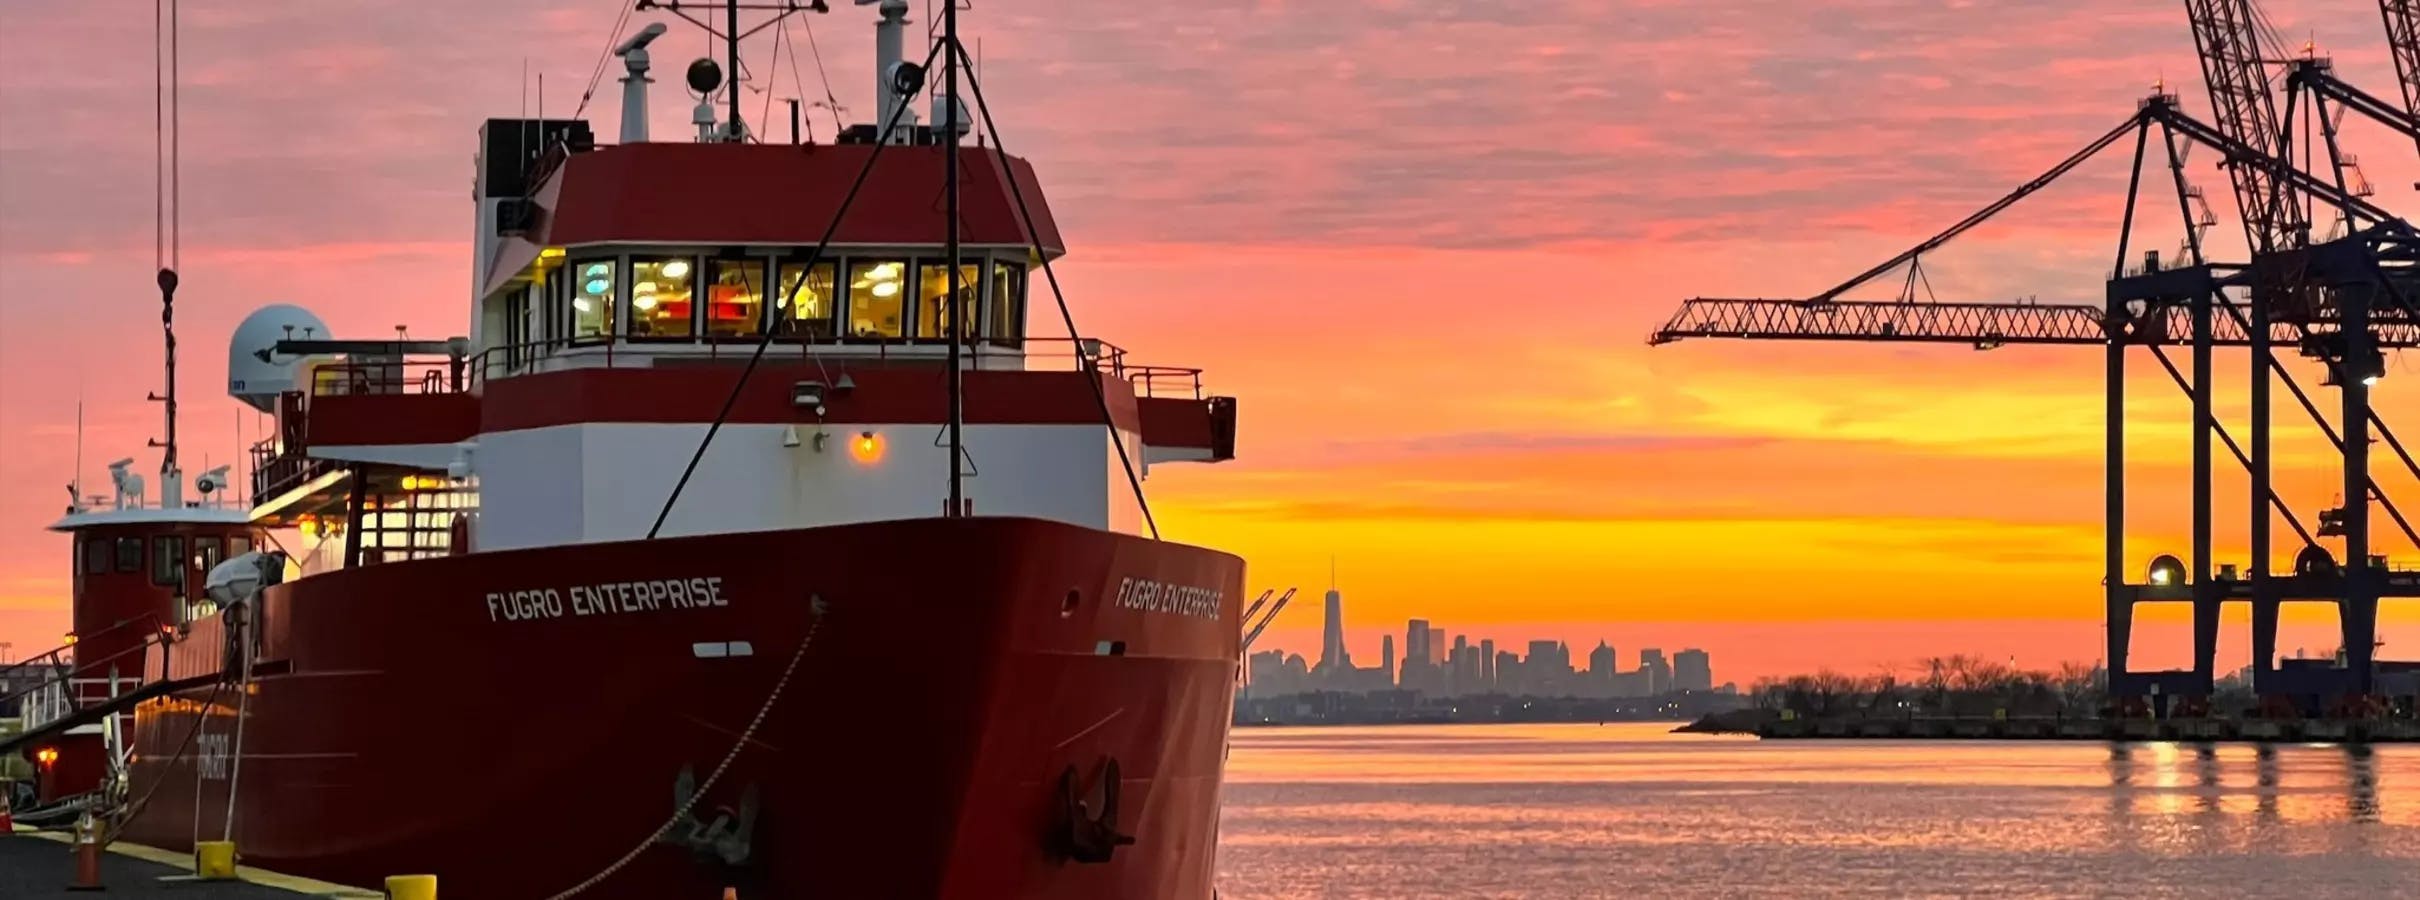 Fugro Enterprise in the USA with New York sunset in the background